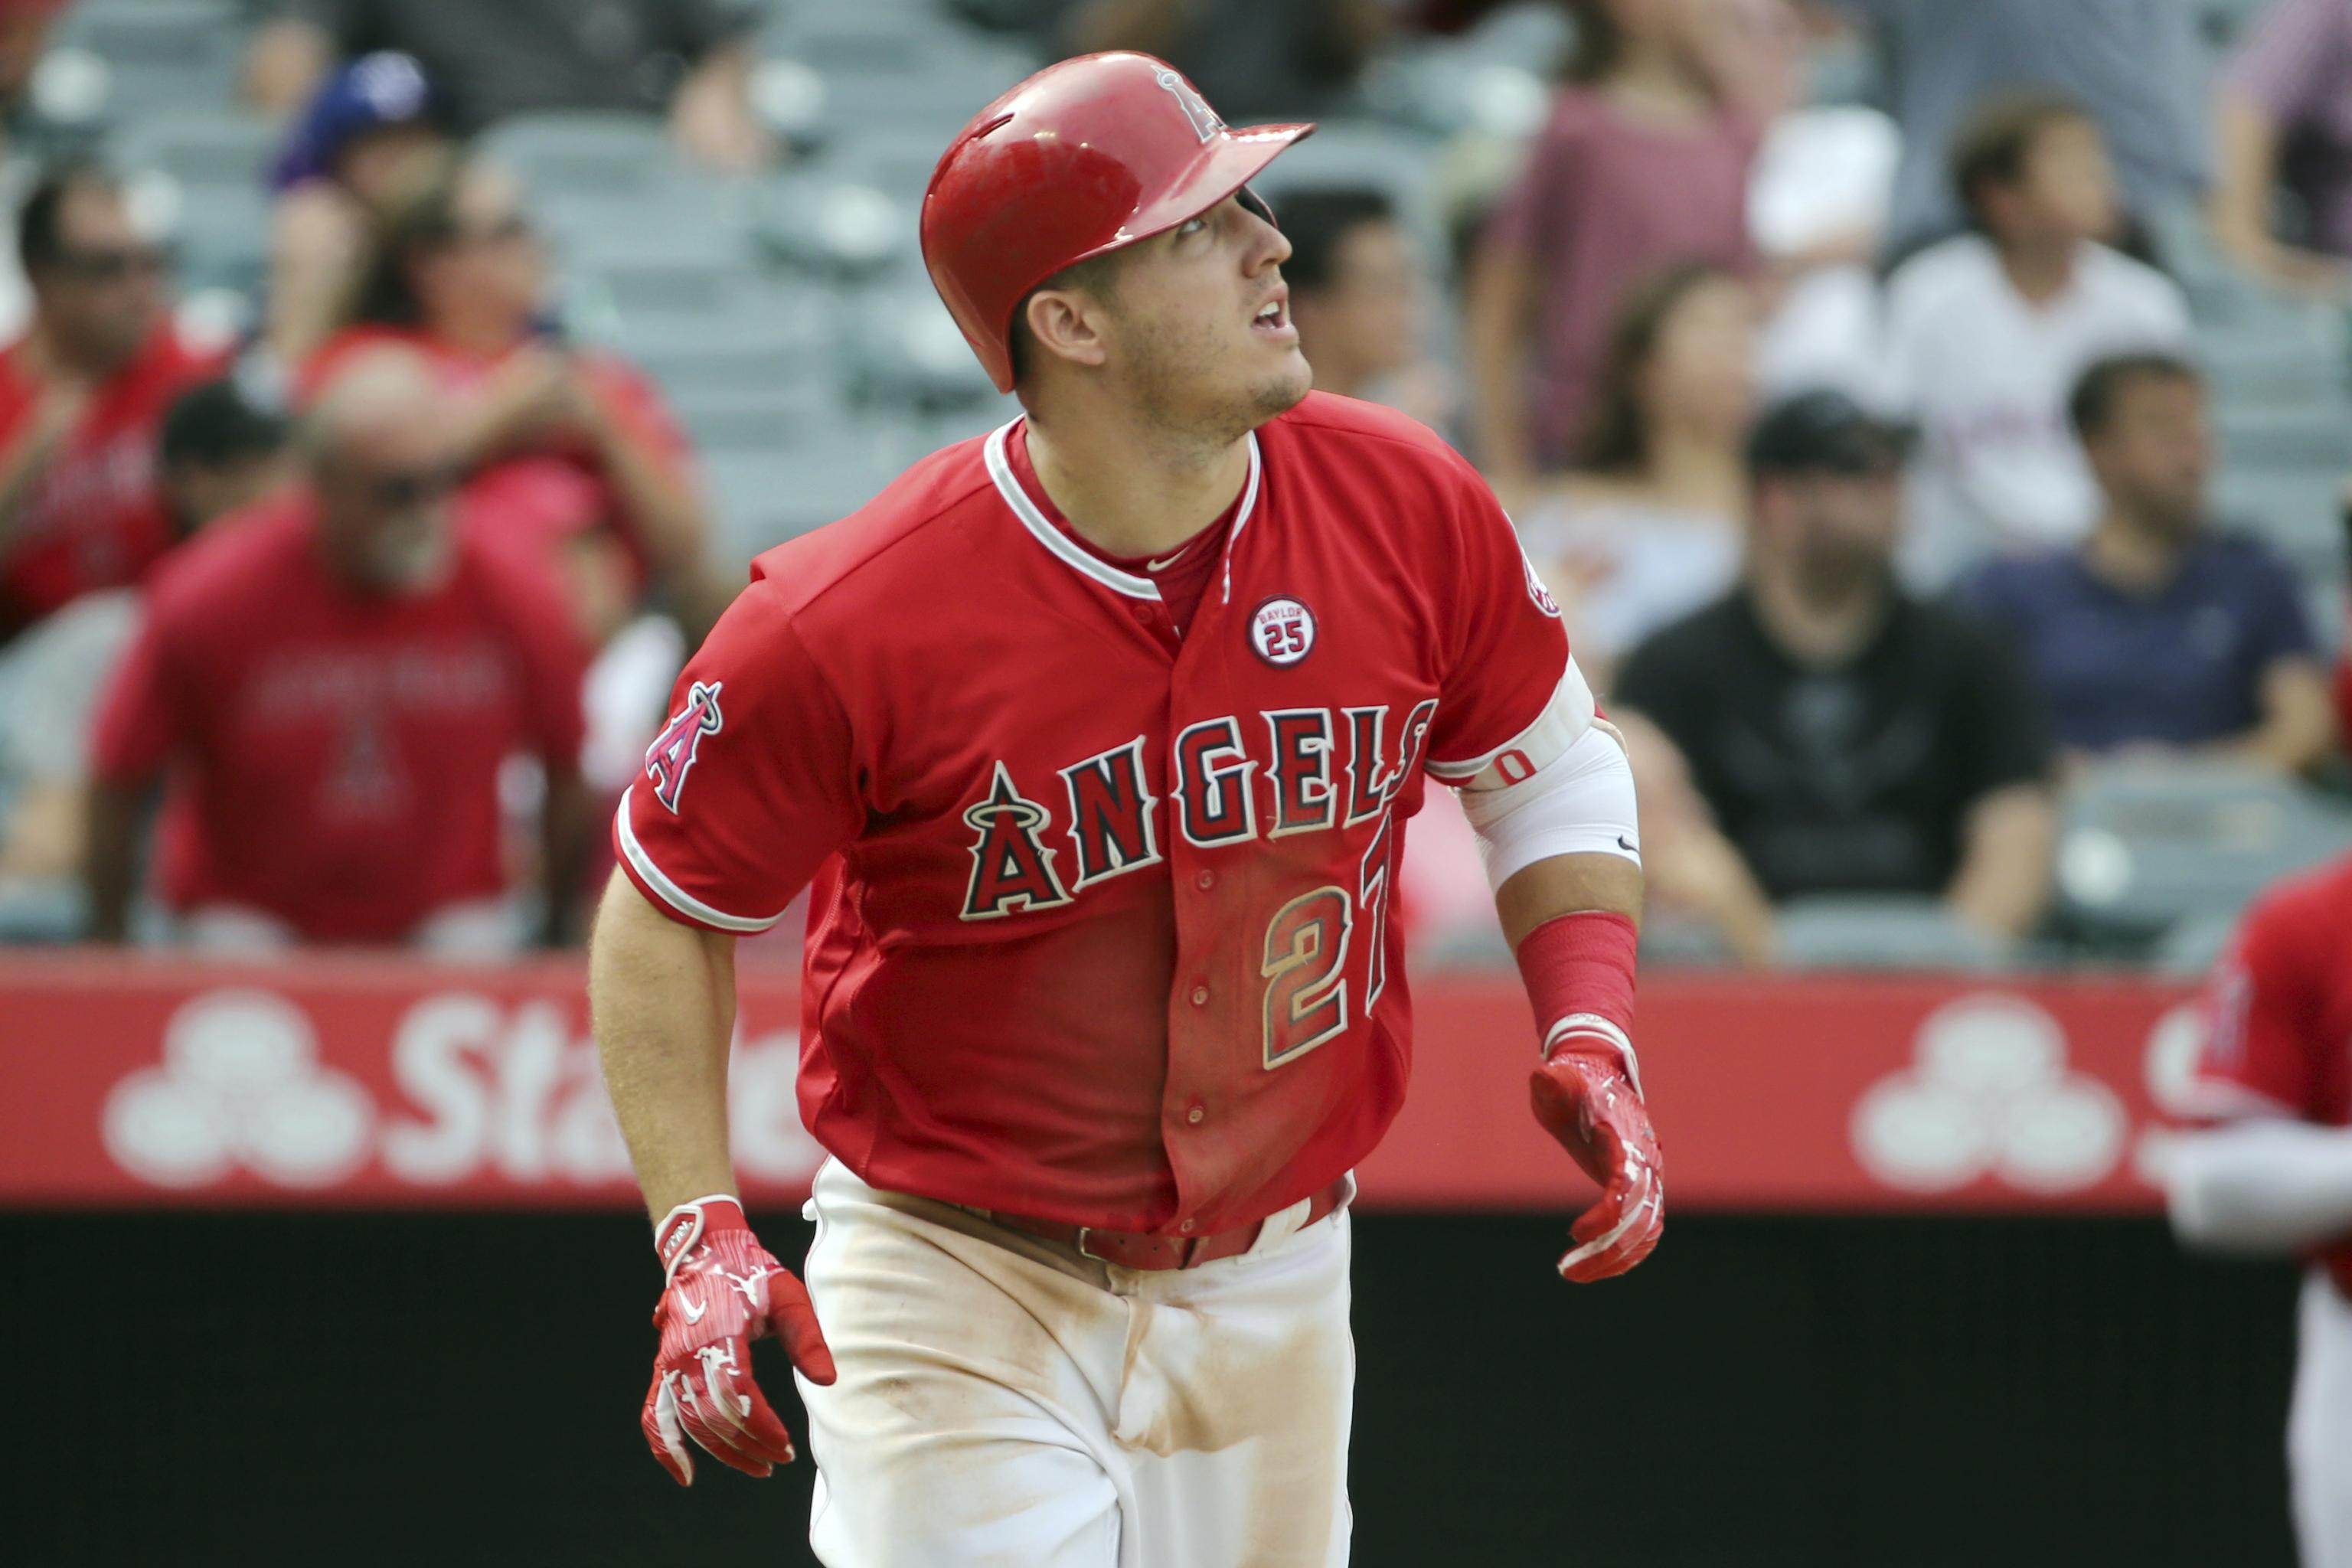 Trout is the most talented player, but is he the G.O.A.T? – The